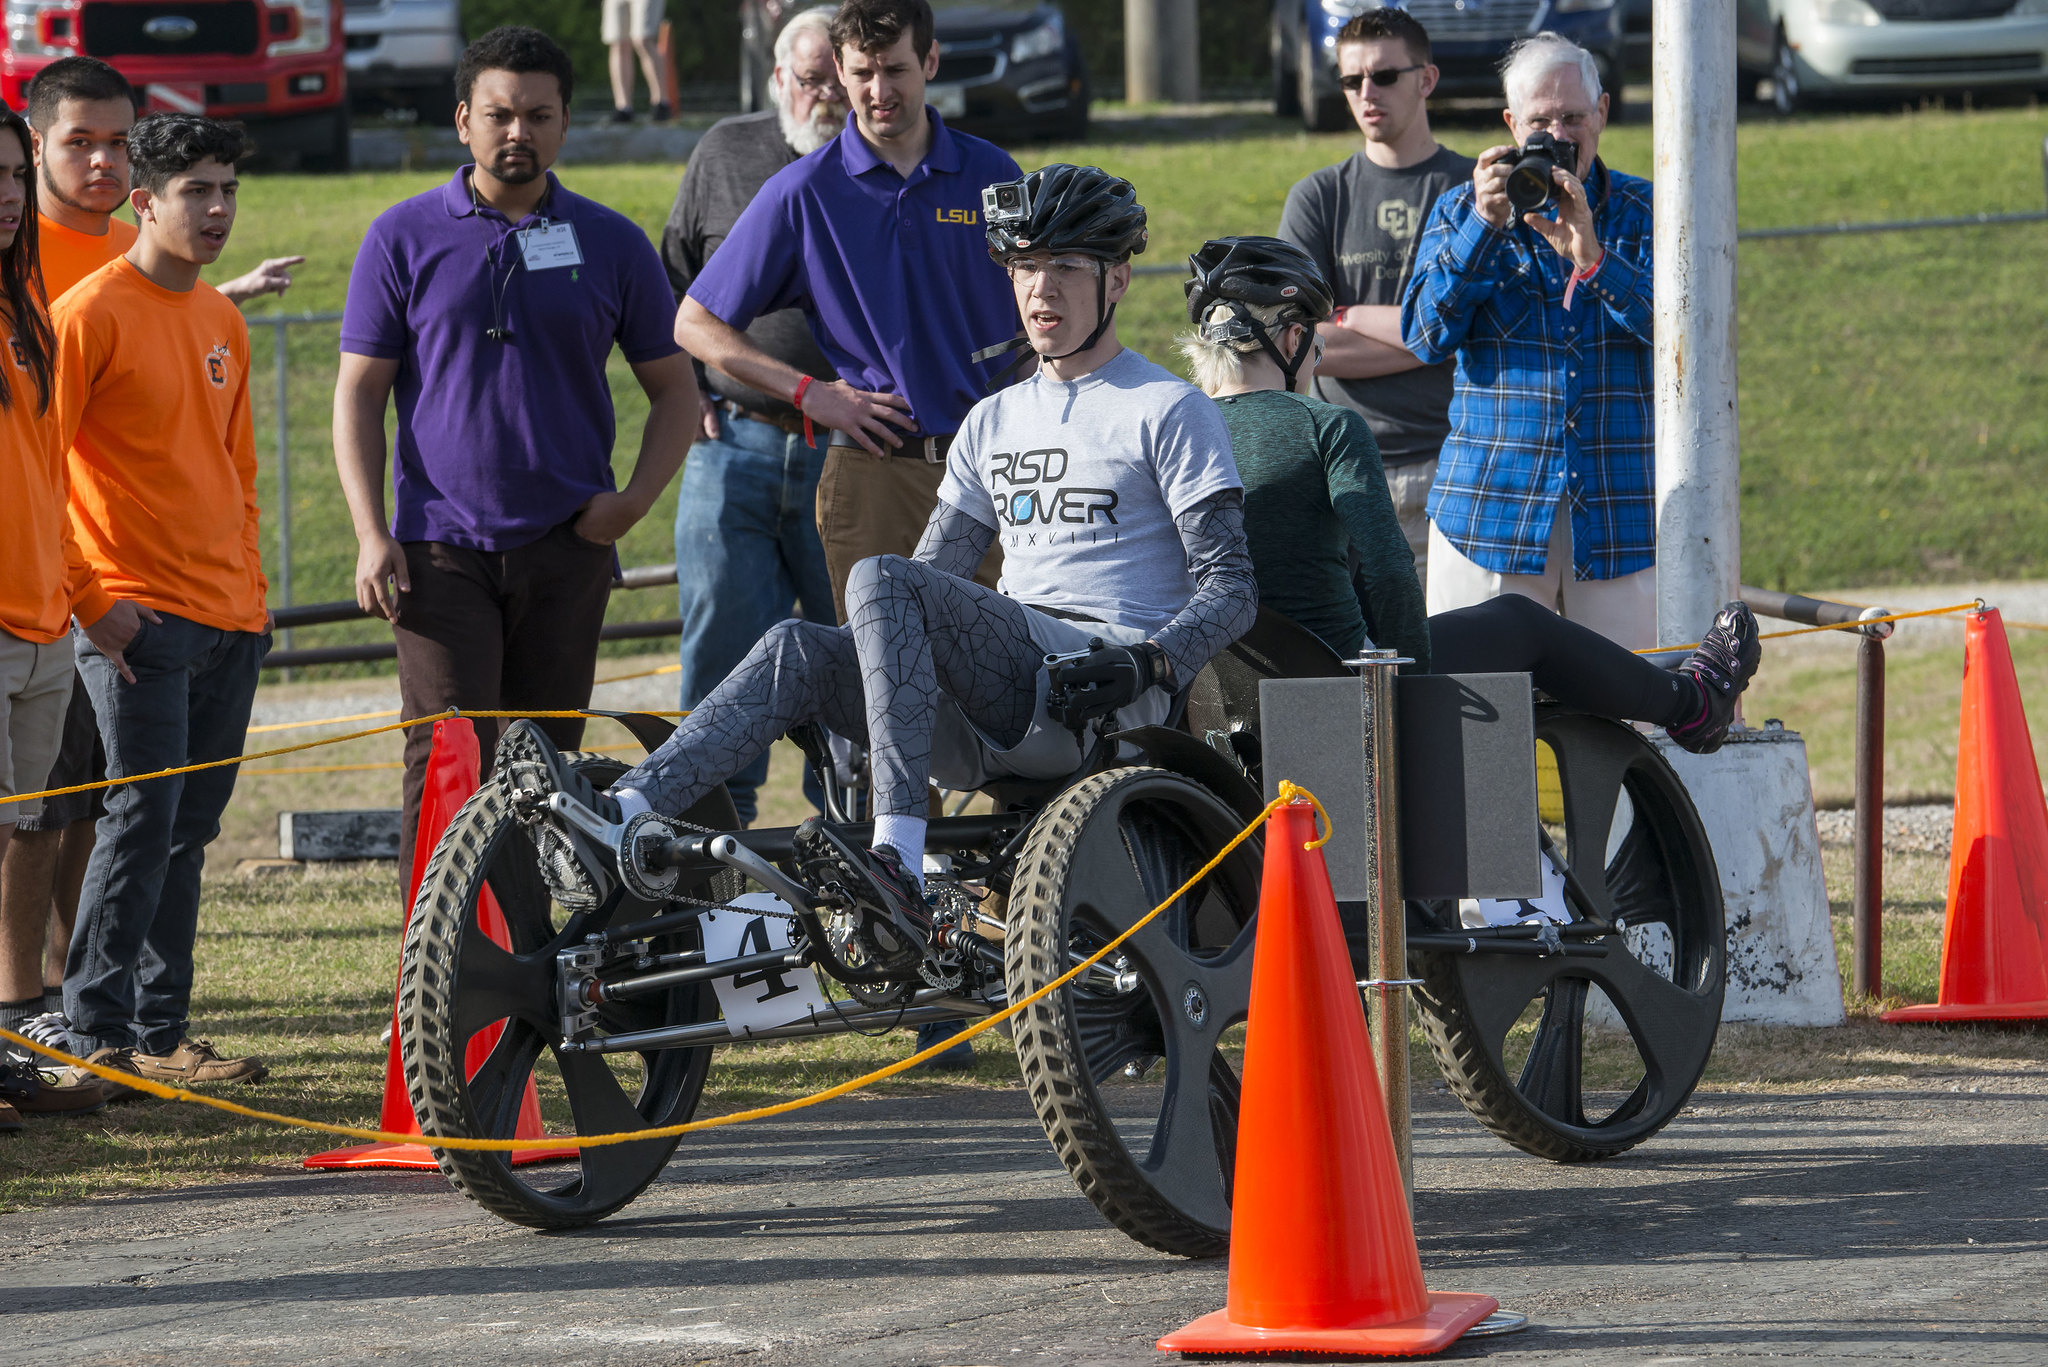 Student competitors from the Rhode Island School of Design in Providence take on the 2018 NASA Human Exploration Rover Challenge